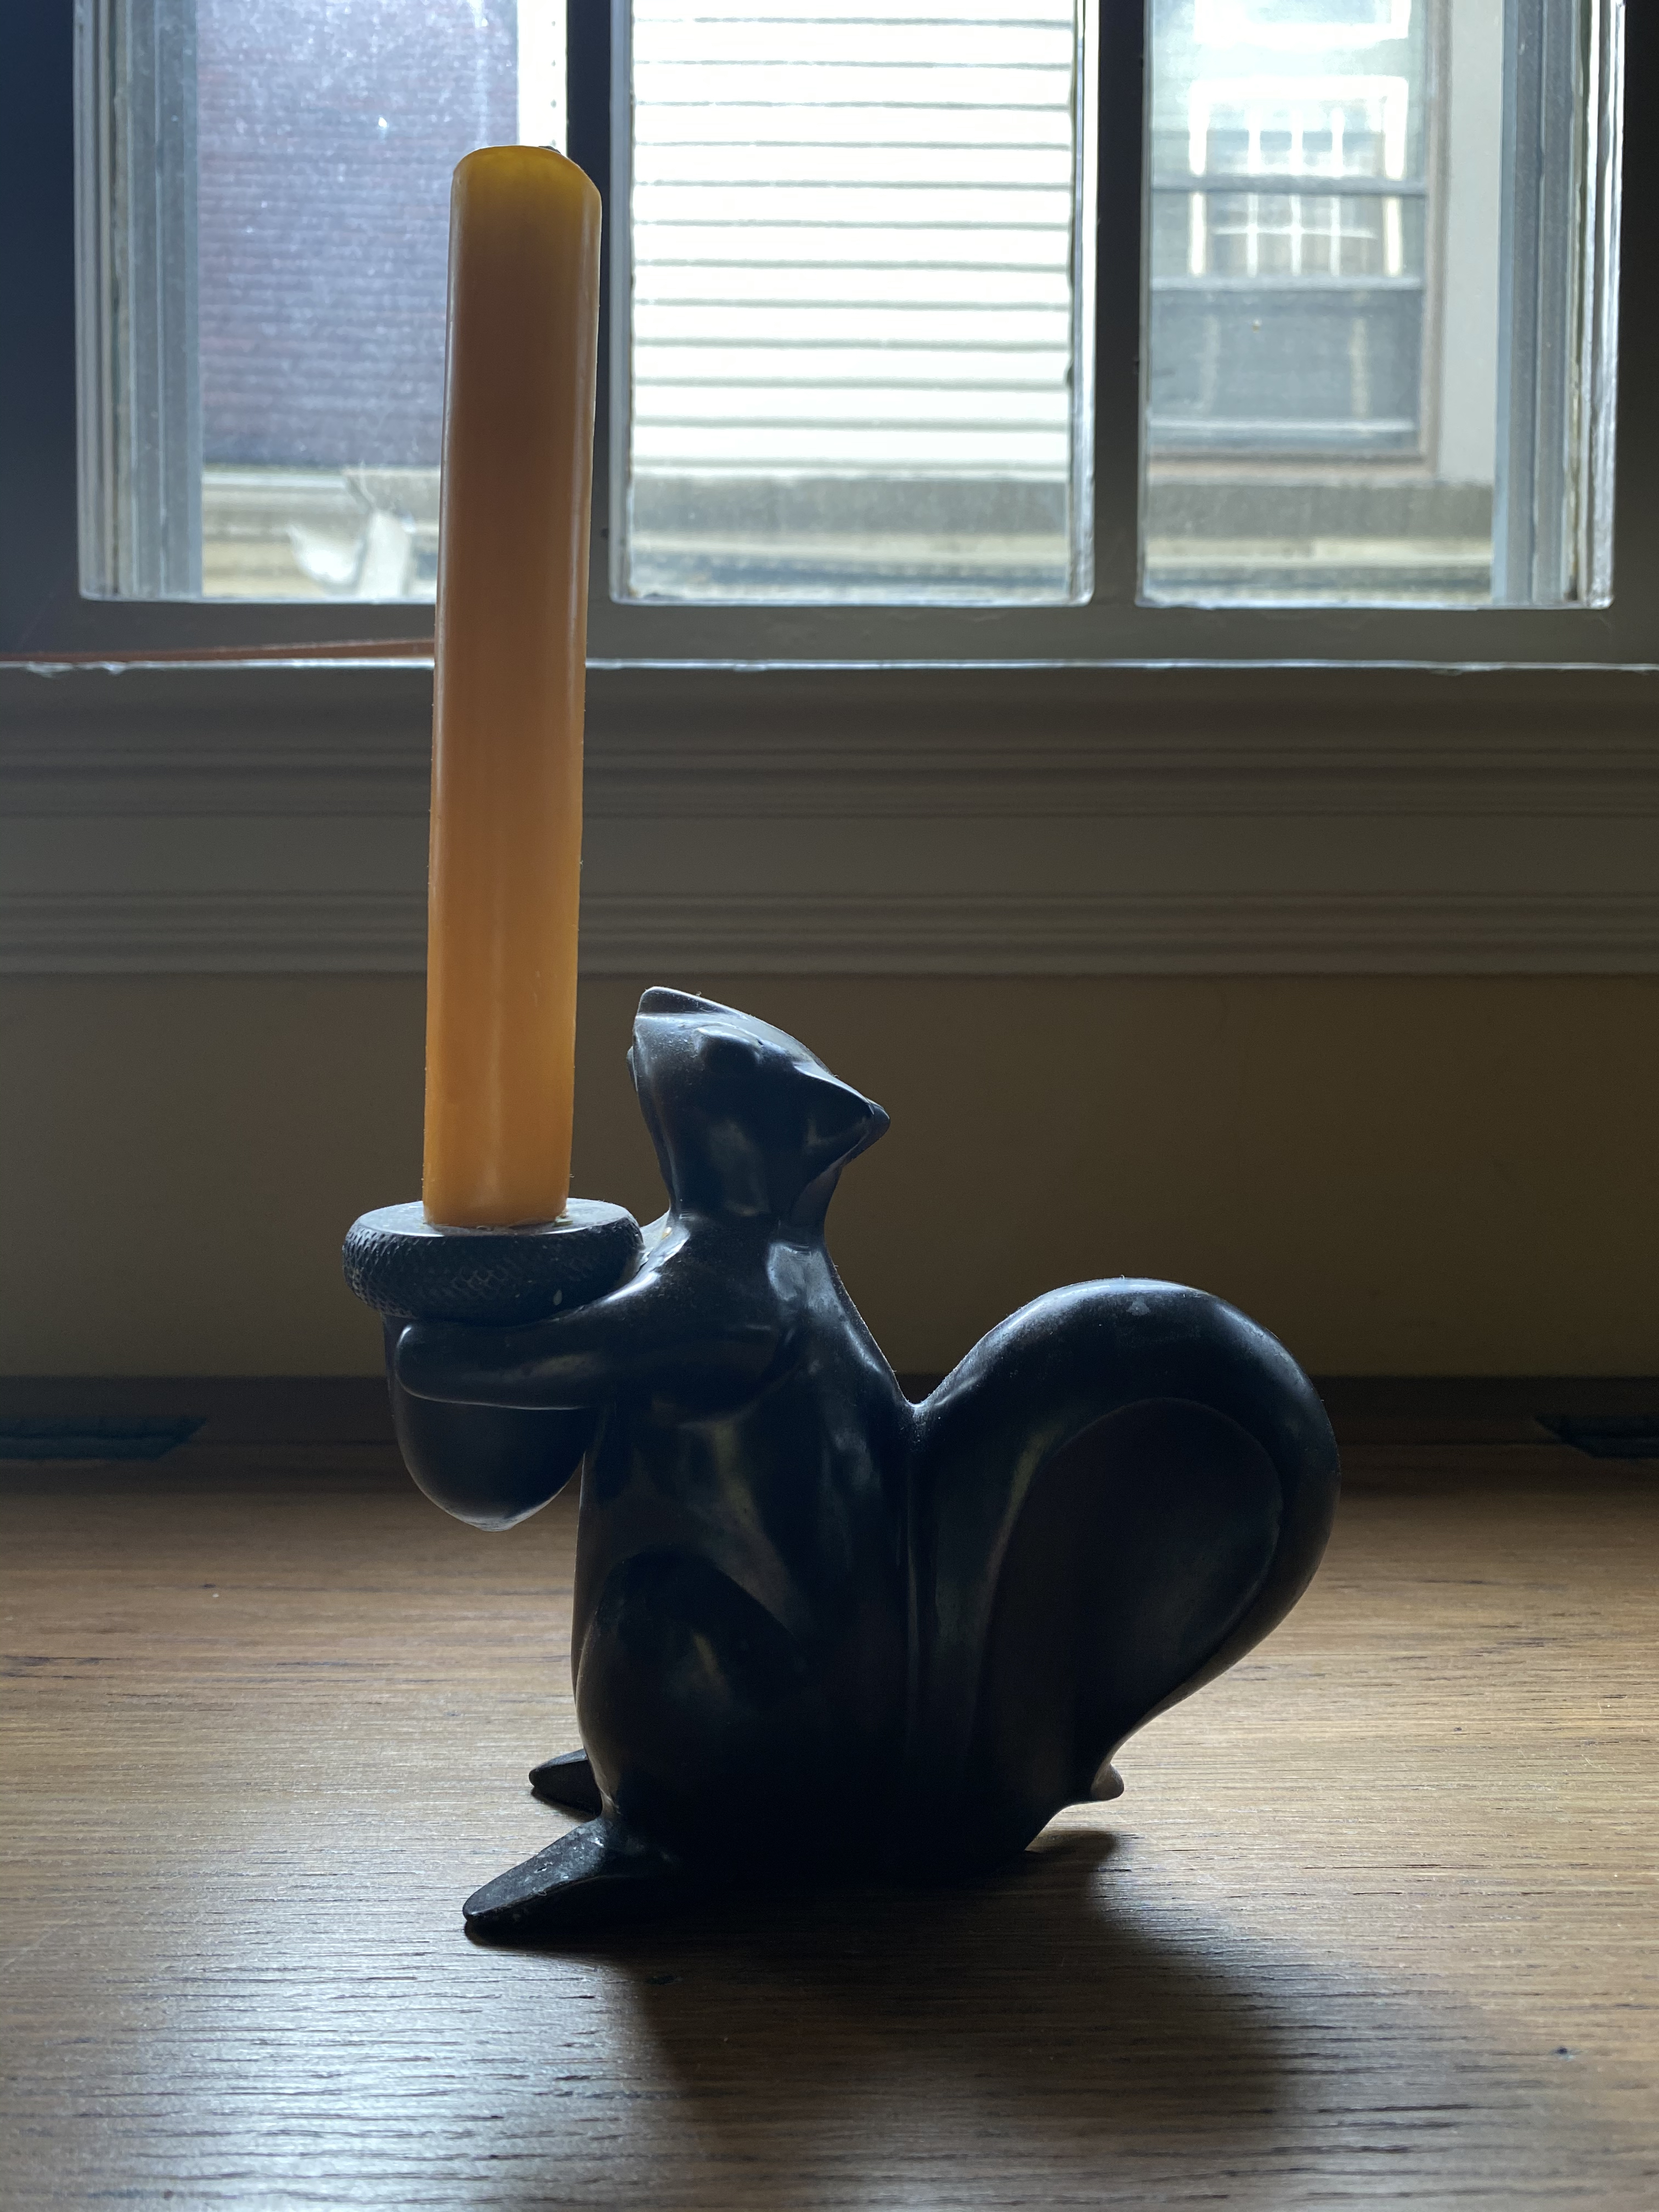 the left of the squirrel, similar to the right. remains of past candles that have dripped over the acorn are visible, but minor. the last candle stick was forrest green